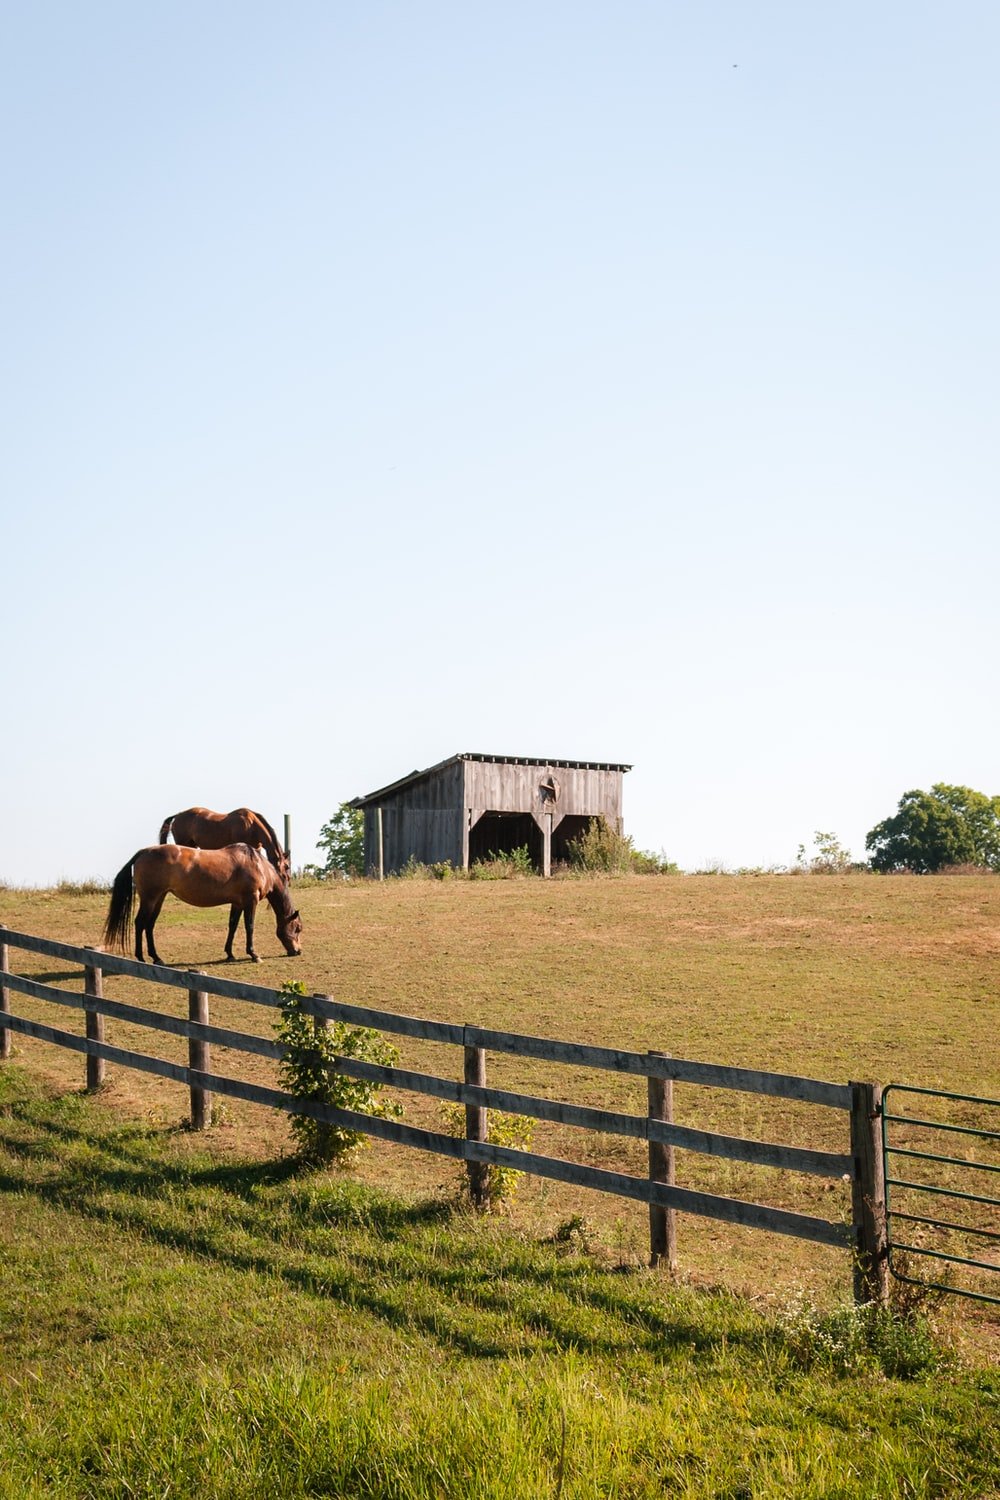 Horse Farm Picture. Download Free Image